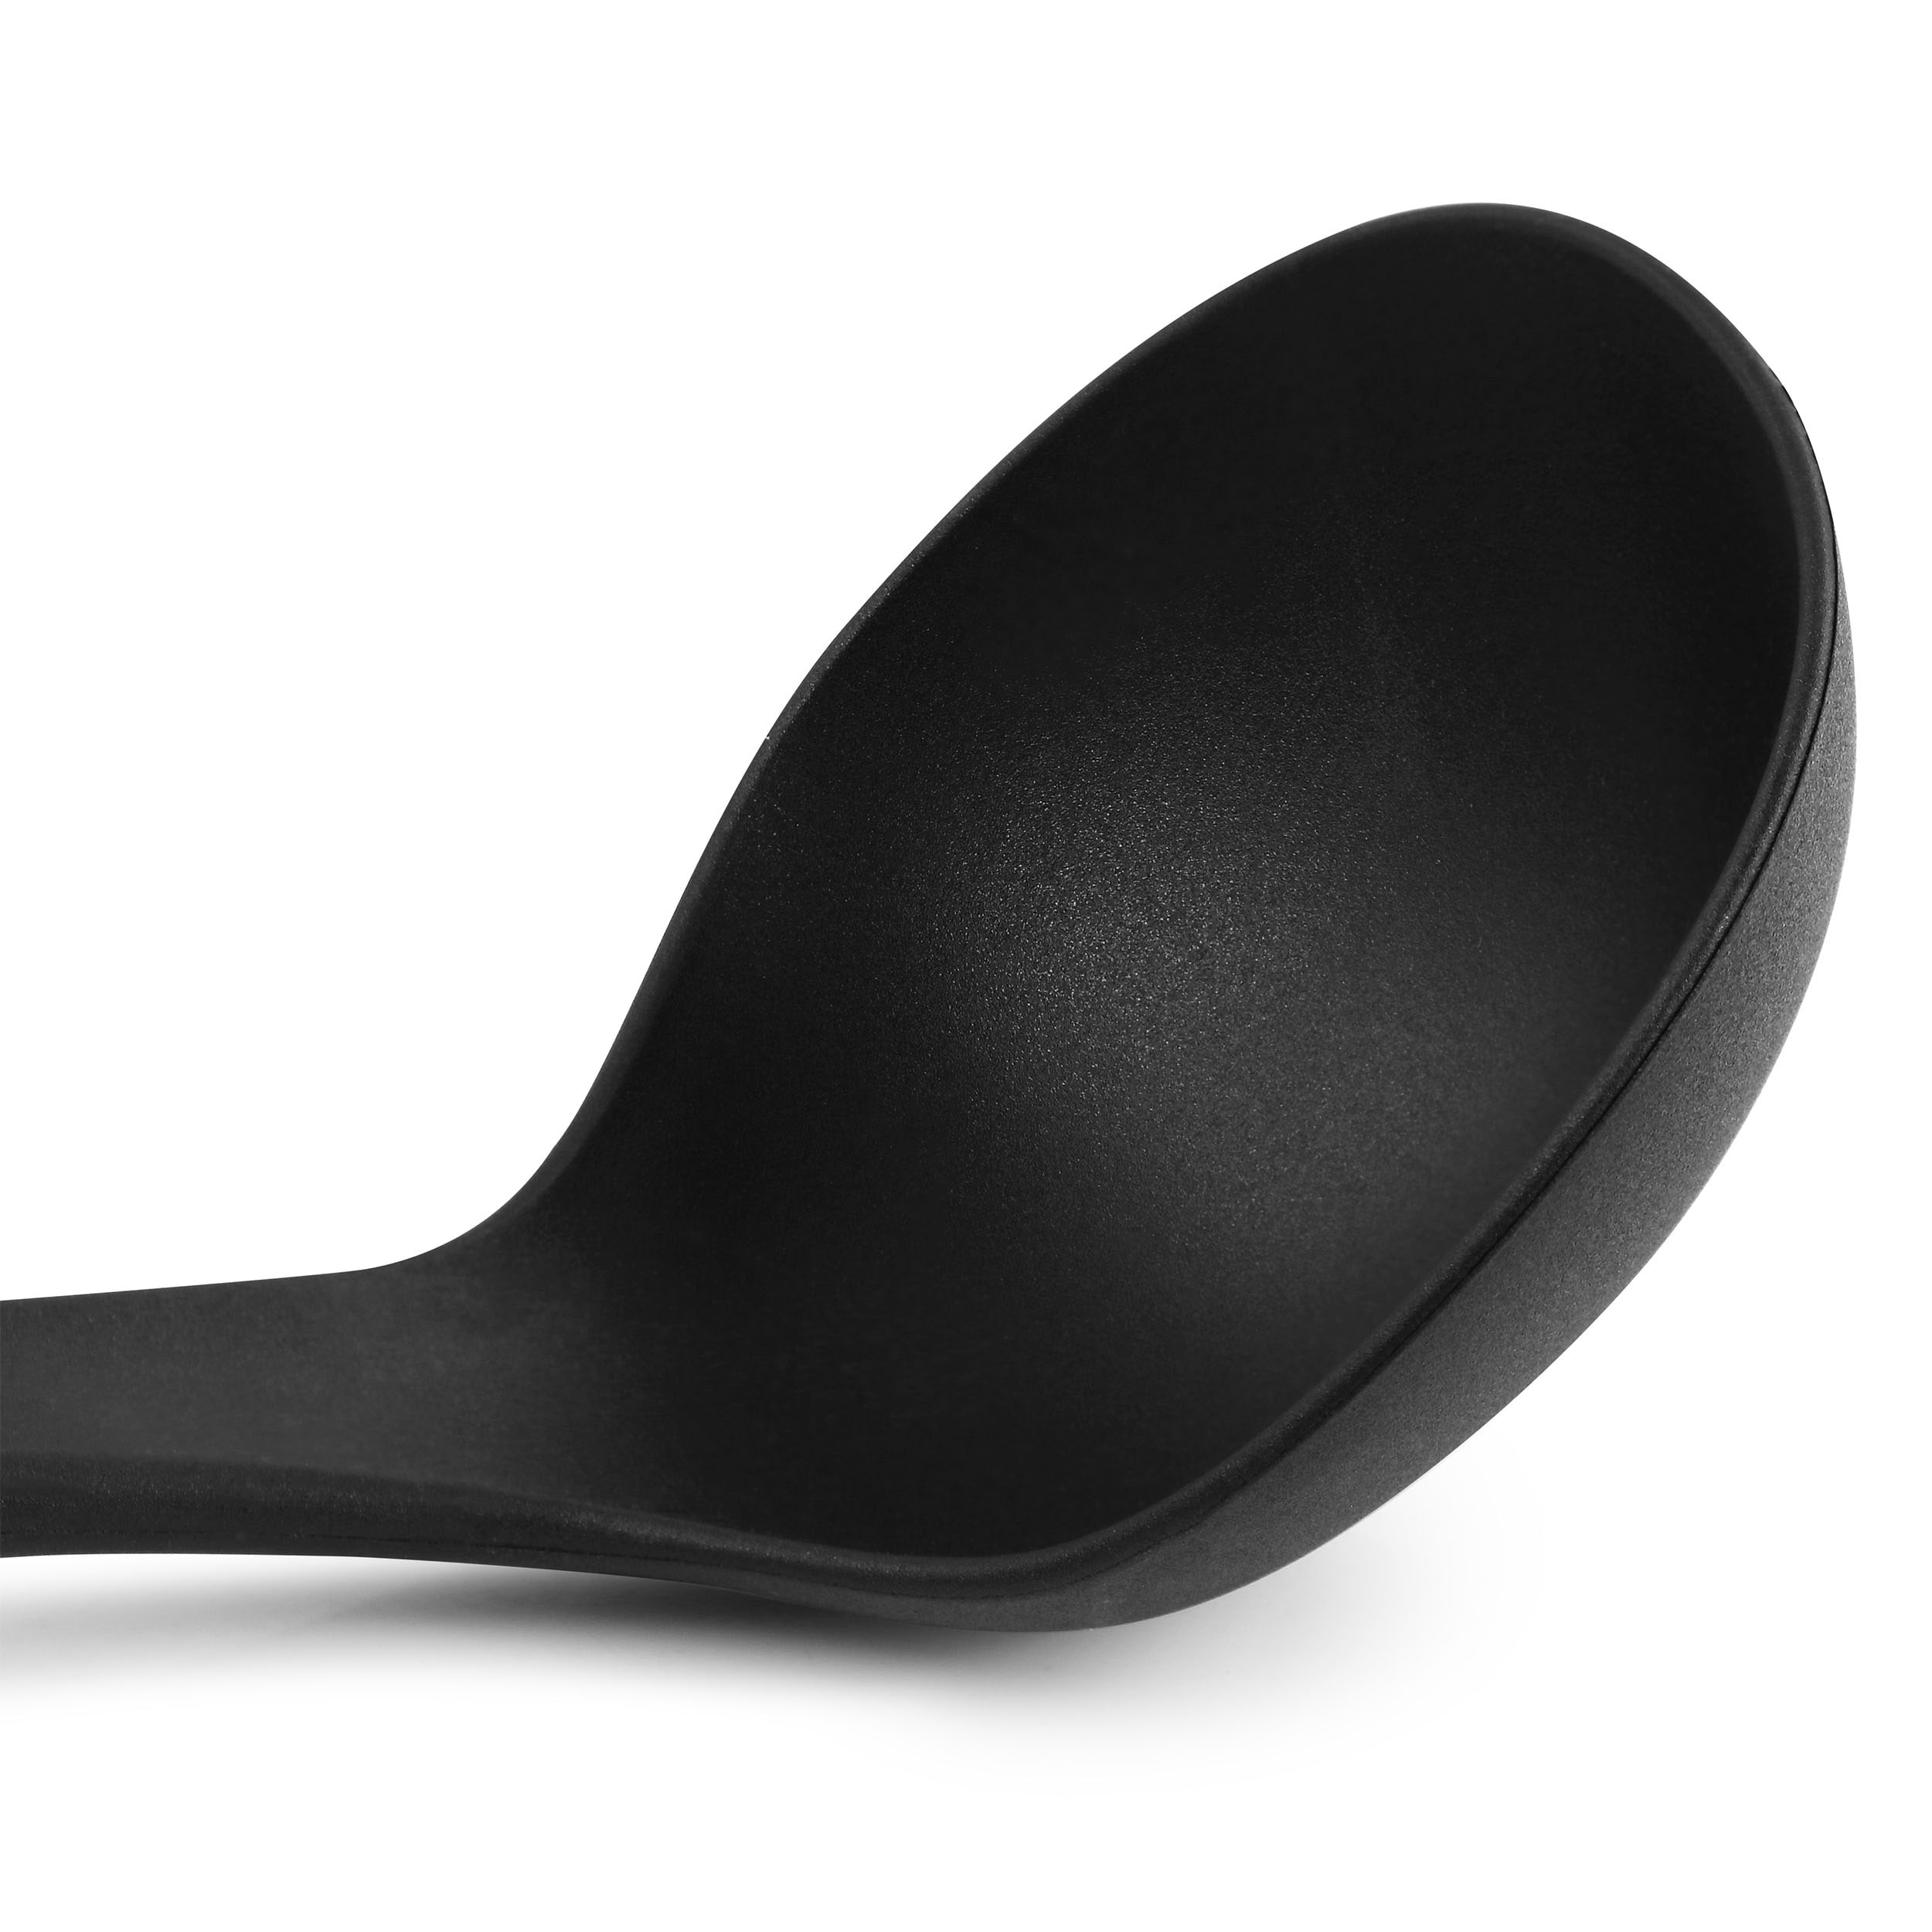 https://ak1.ostkcdn.com/images/products/is/images/direct/442c43f1e3e5b08ecf95c7648fc01ce1900c8b6e/Oster-Baldwyn-Nylon-Ladle-Kitchen-Utensil-with-Stainless-Steel-Handle.jpg